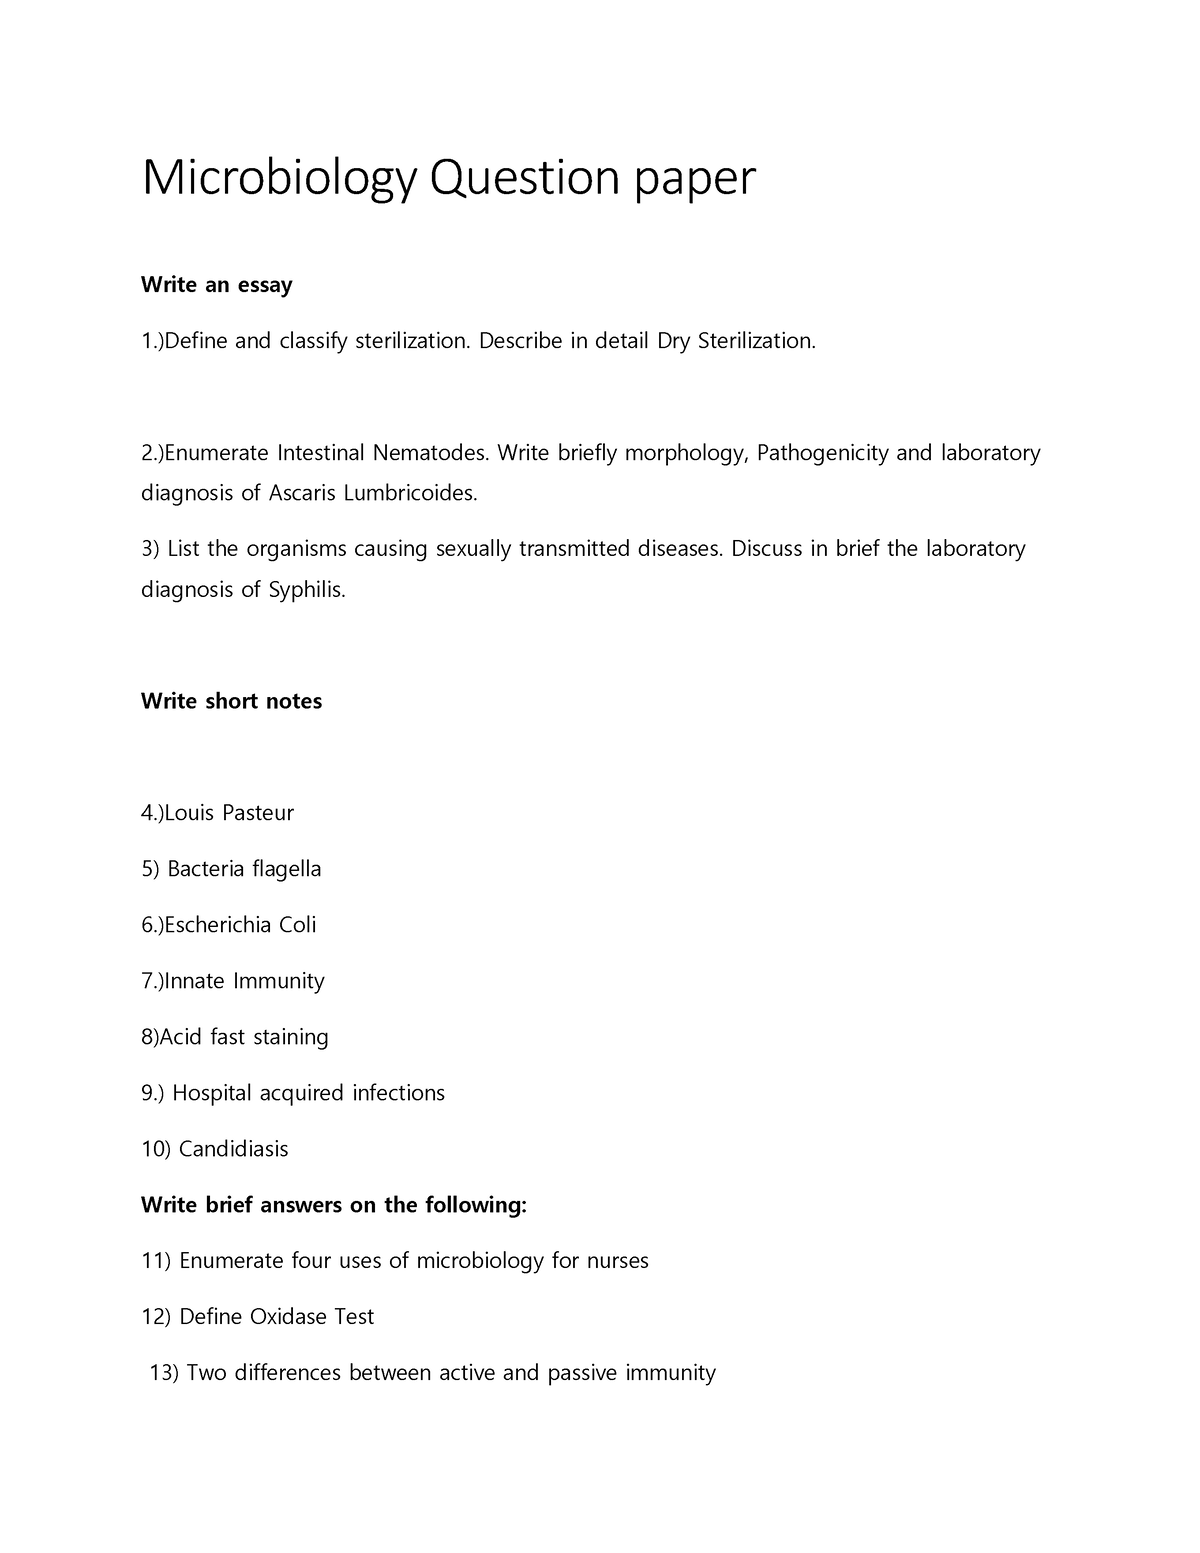 microbiology essay questions and answers pdf